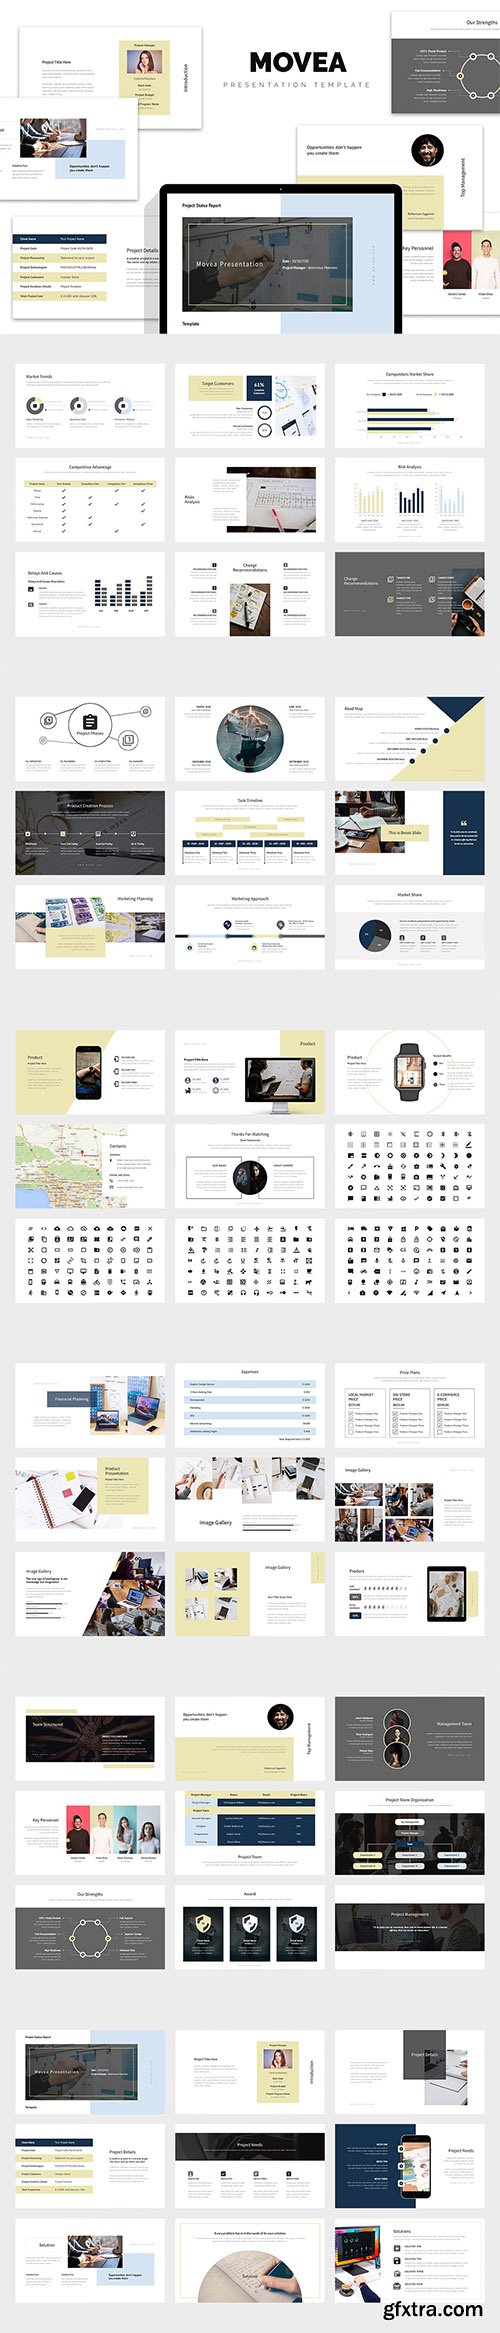 Movea : Project Status Report Powerpoint Template